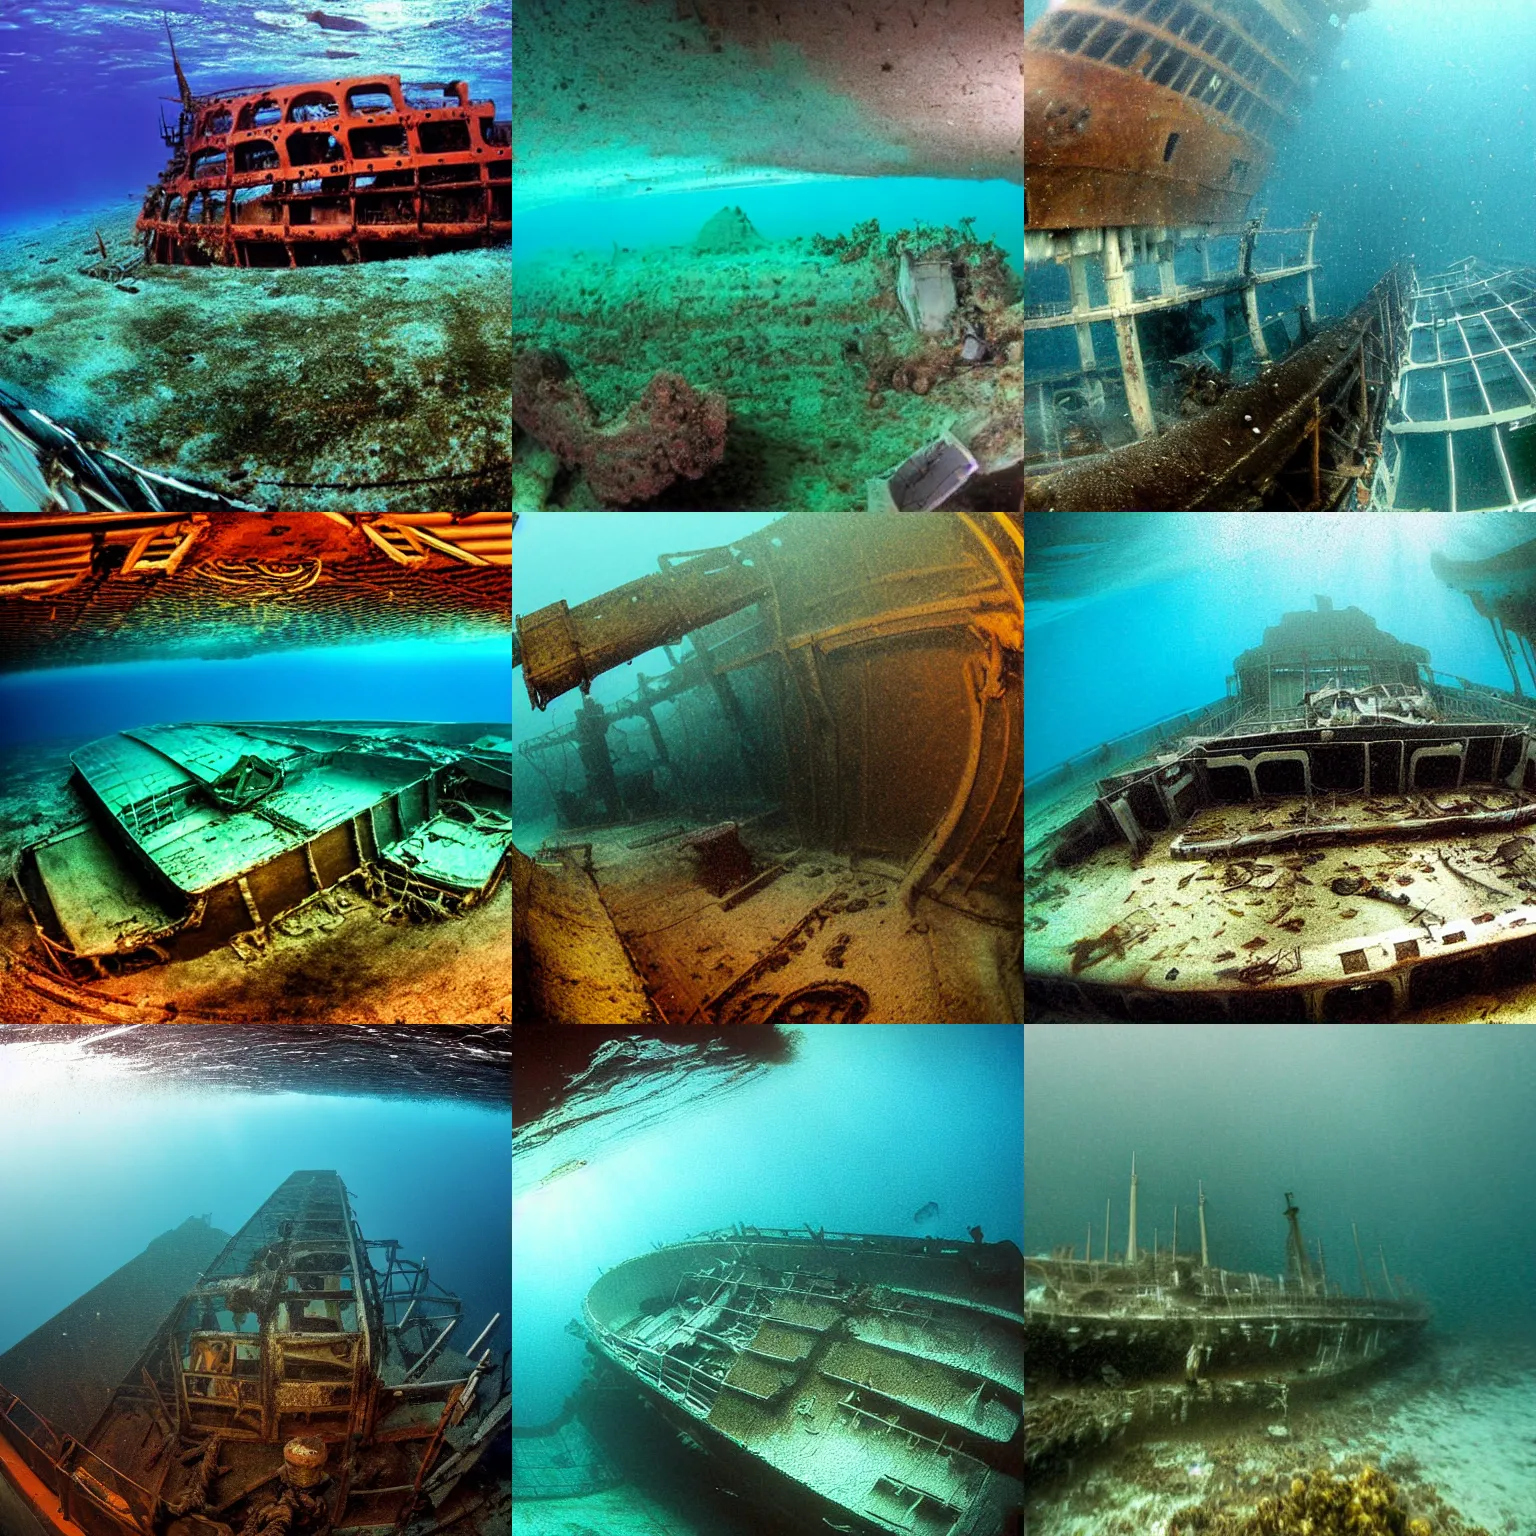 Prompt: underwater photograph of a shipwreck of a huge cruise ship